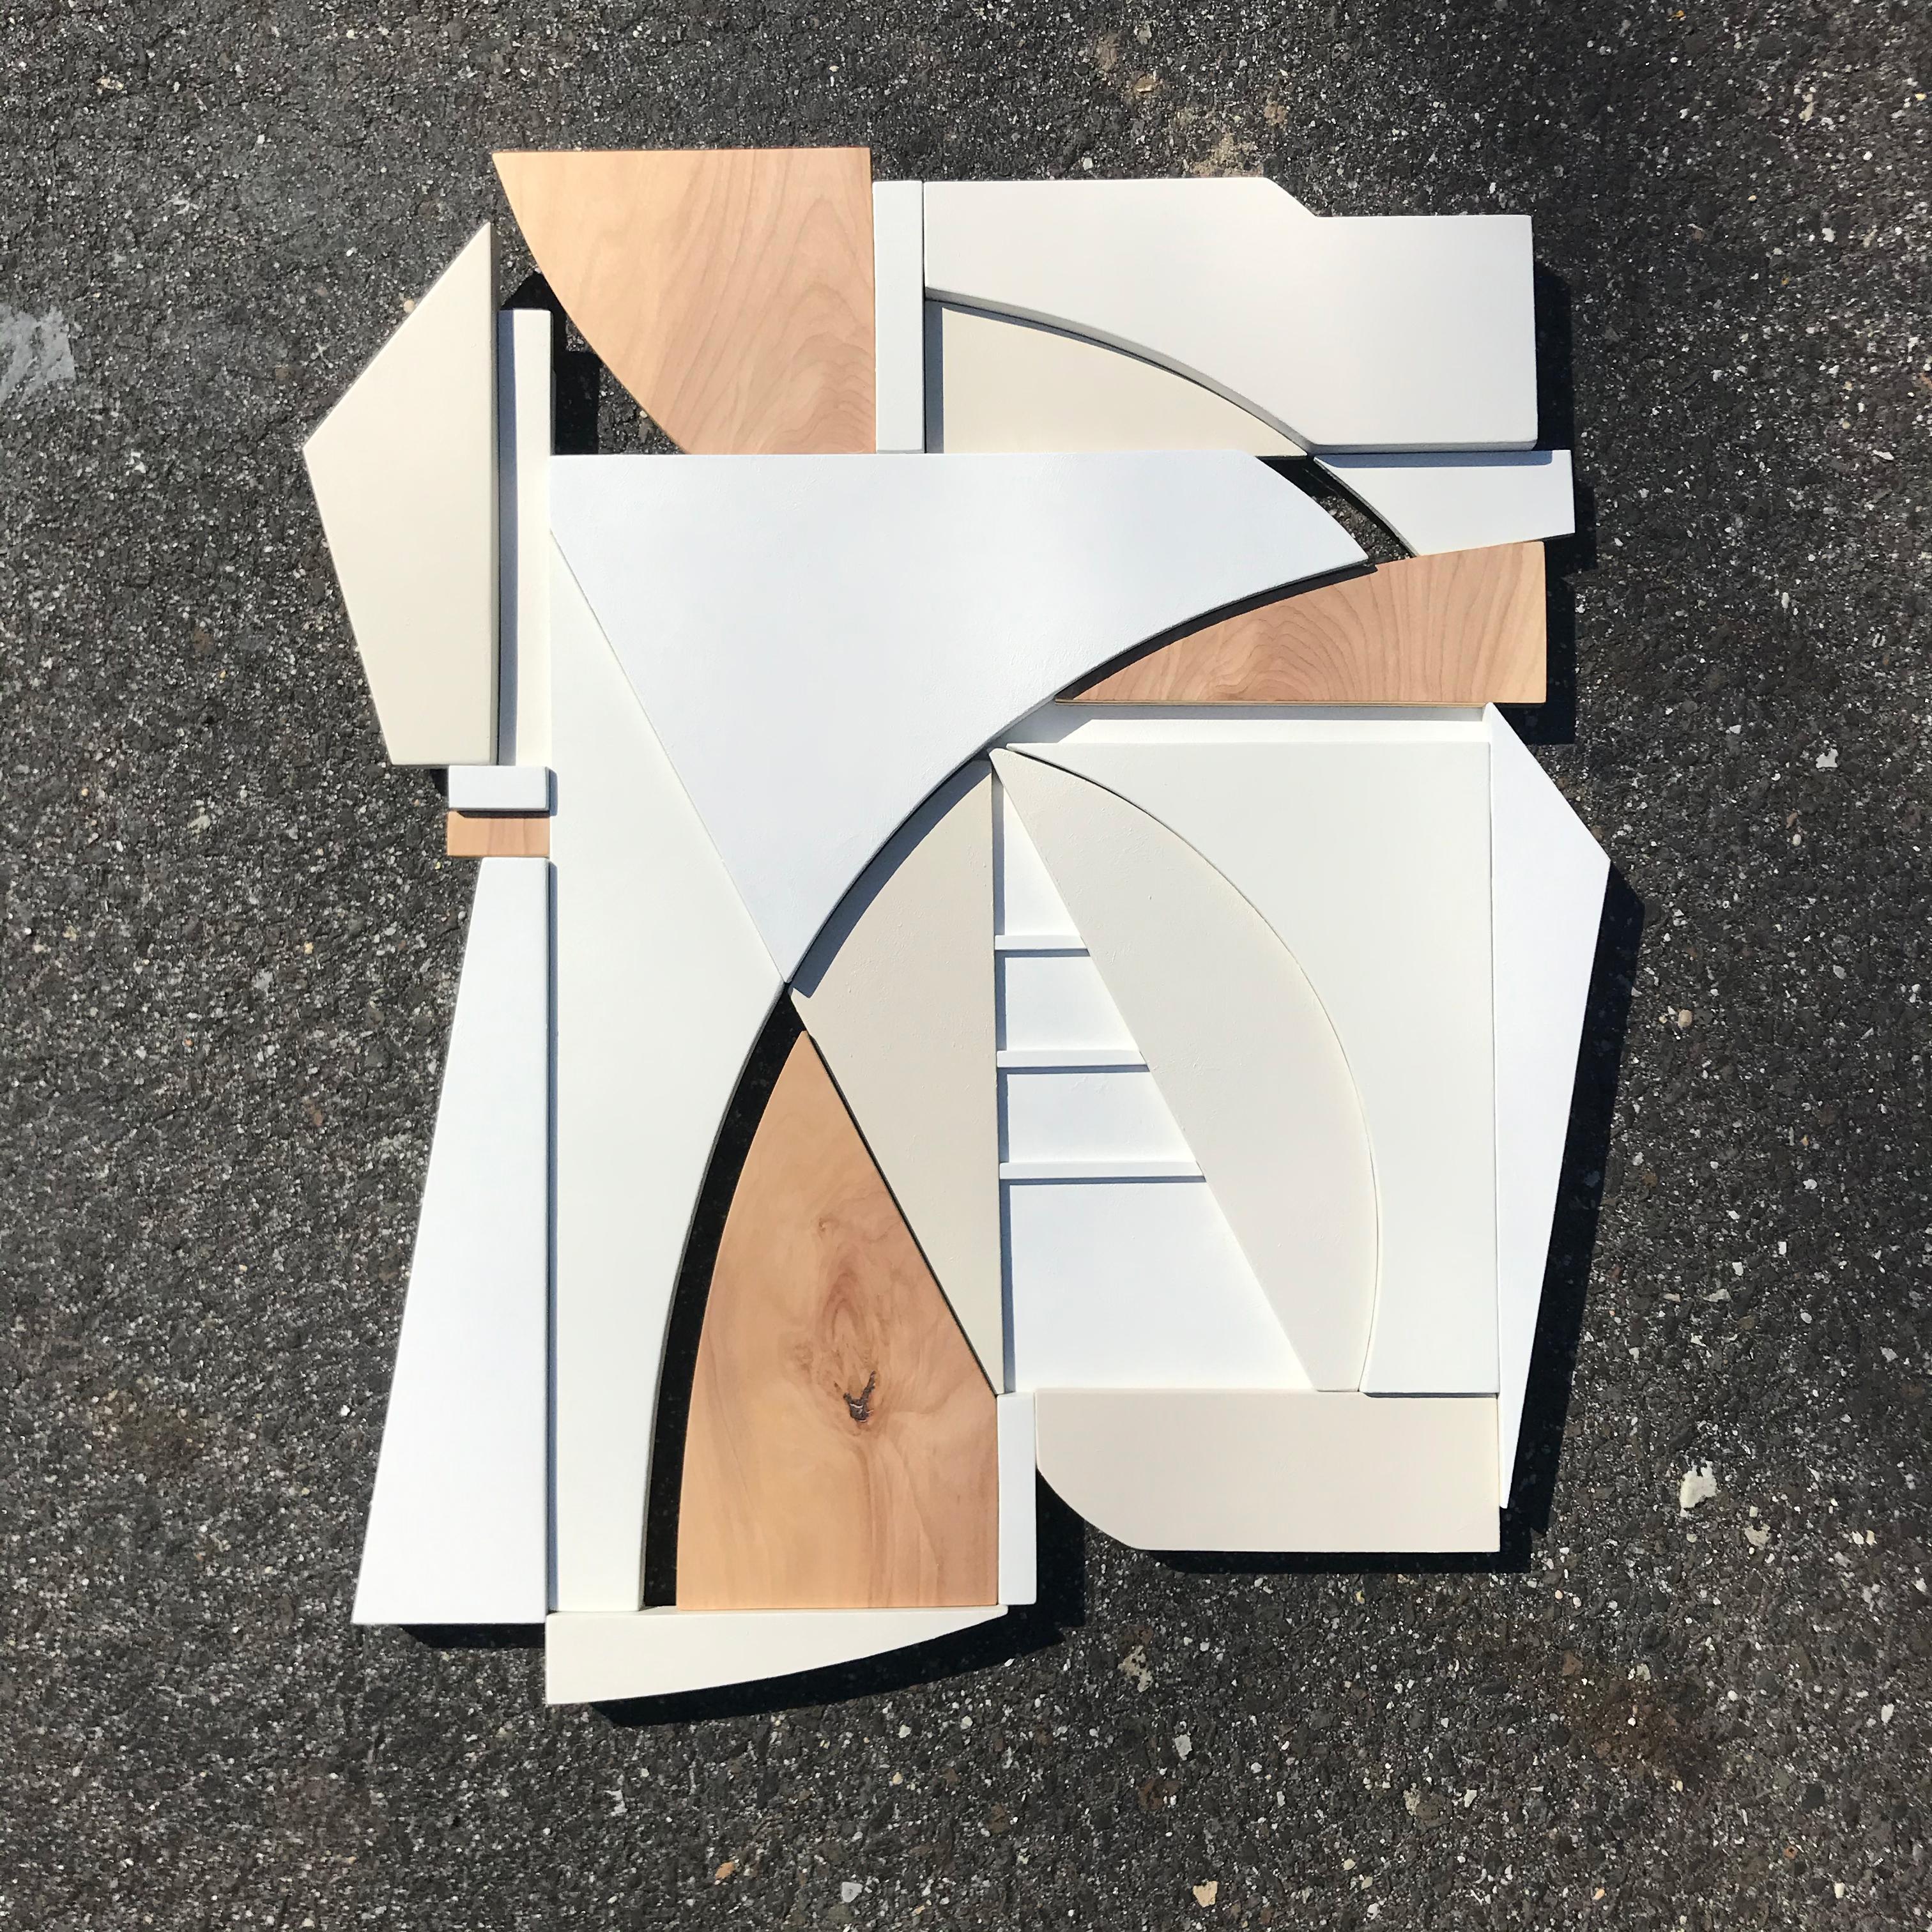 King (modern art deco abstract wall sculpture geometric white natural monochrome 1